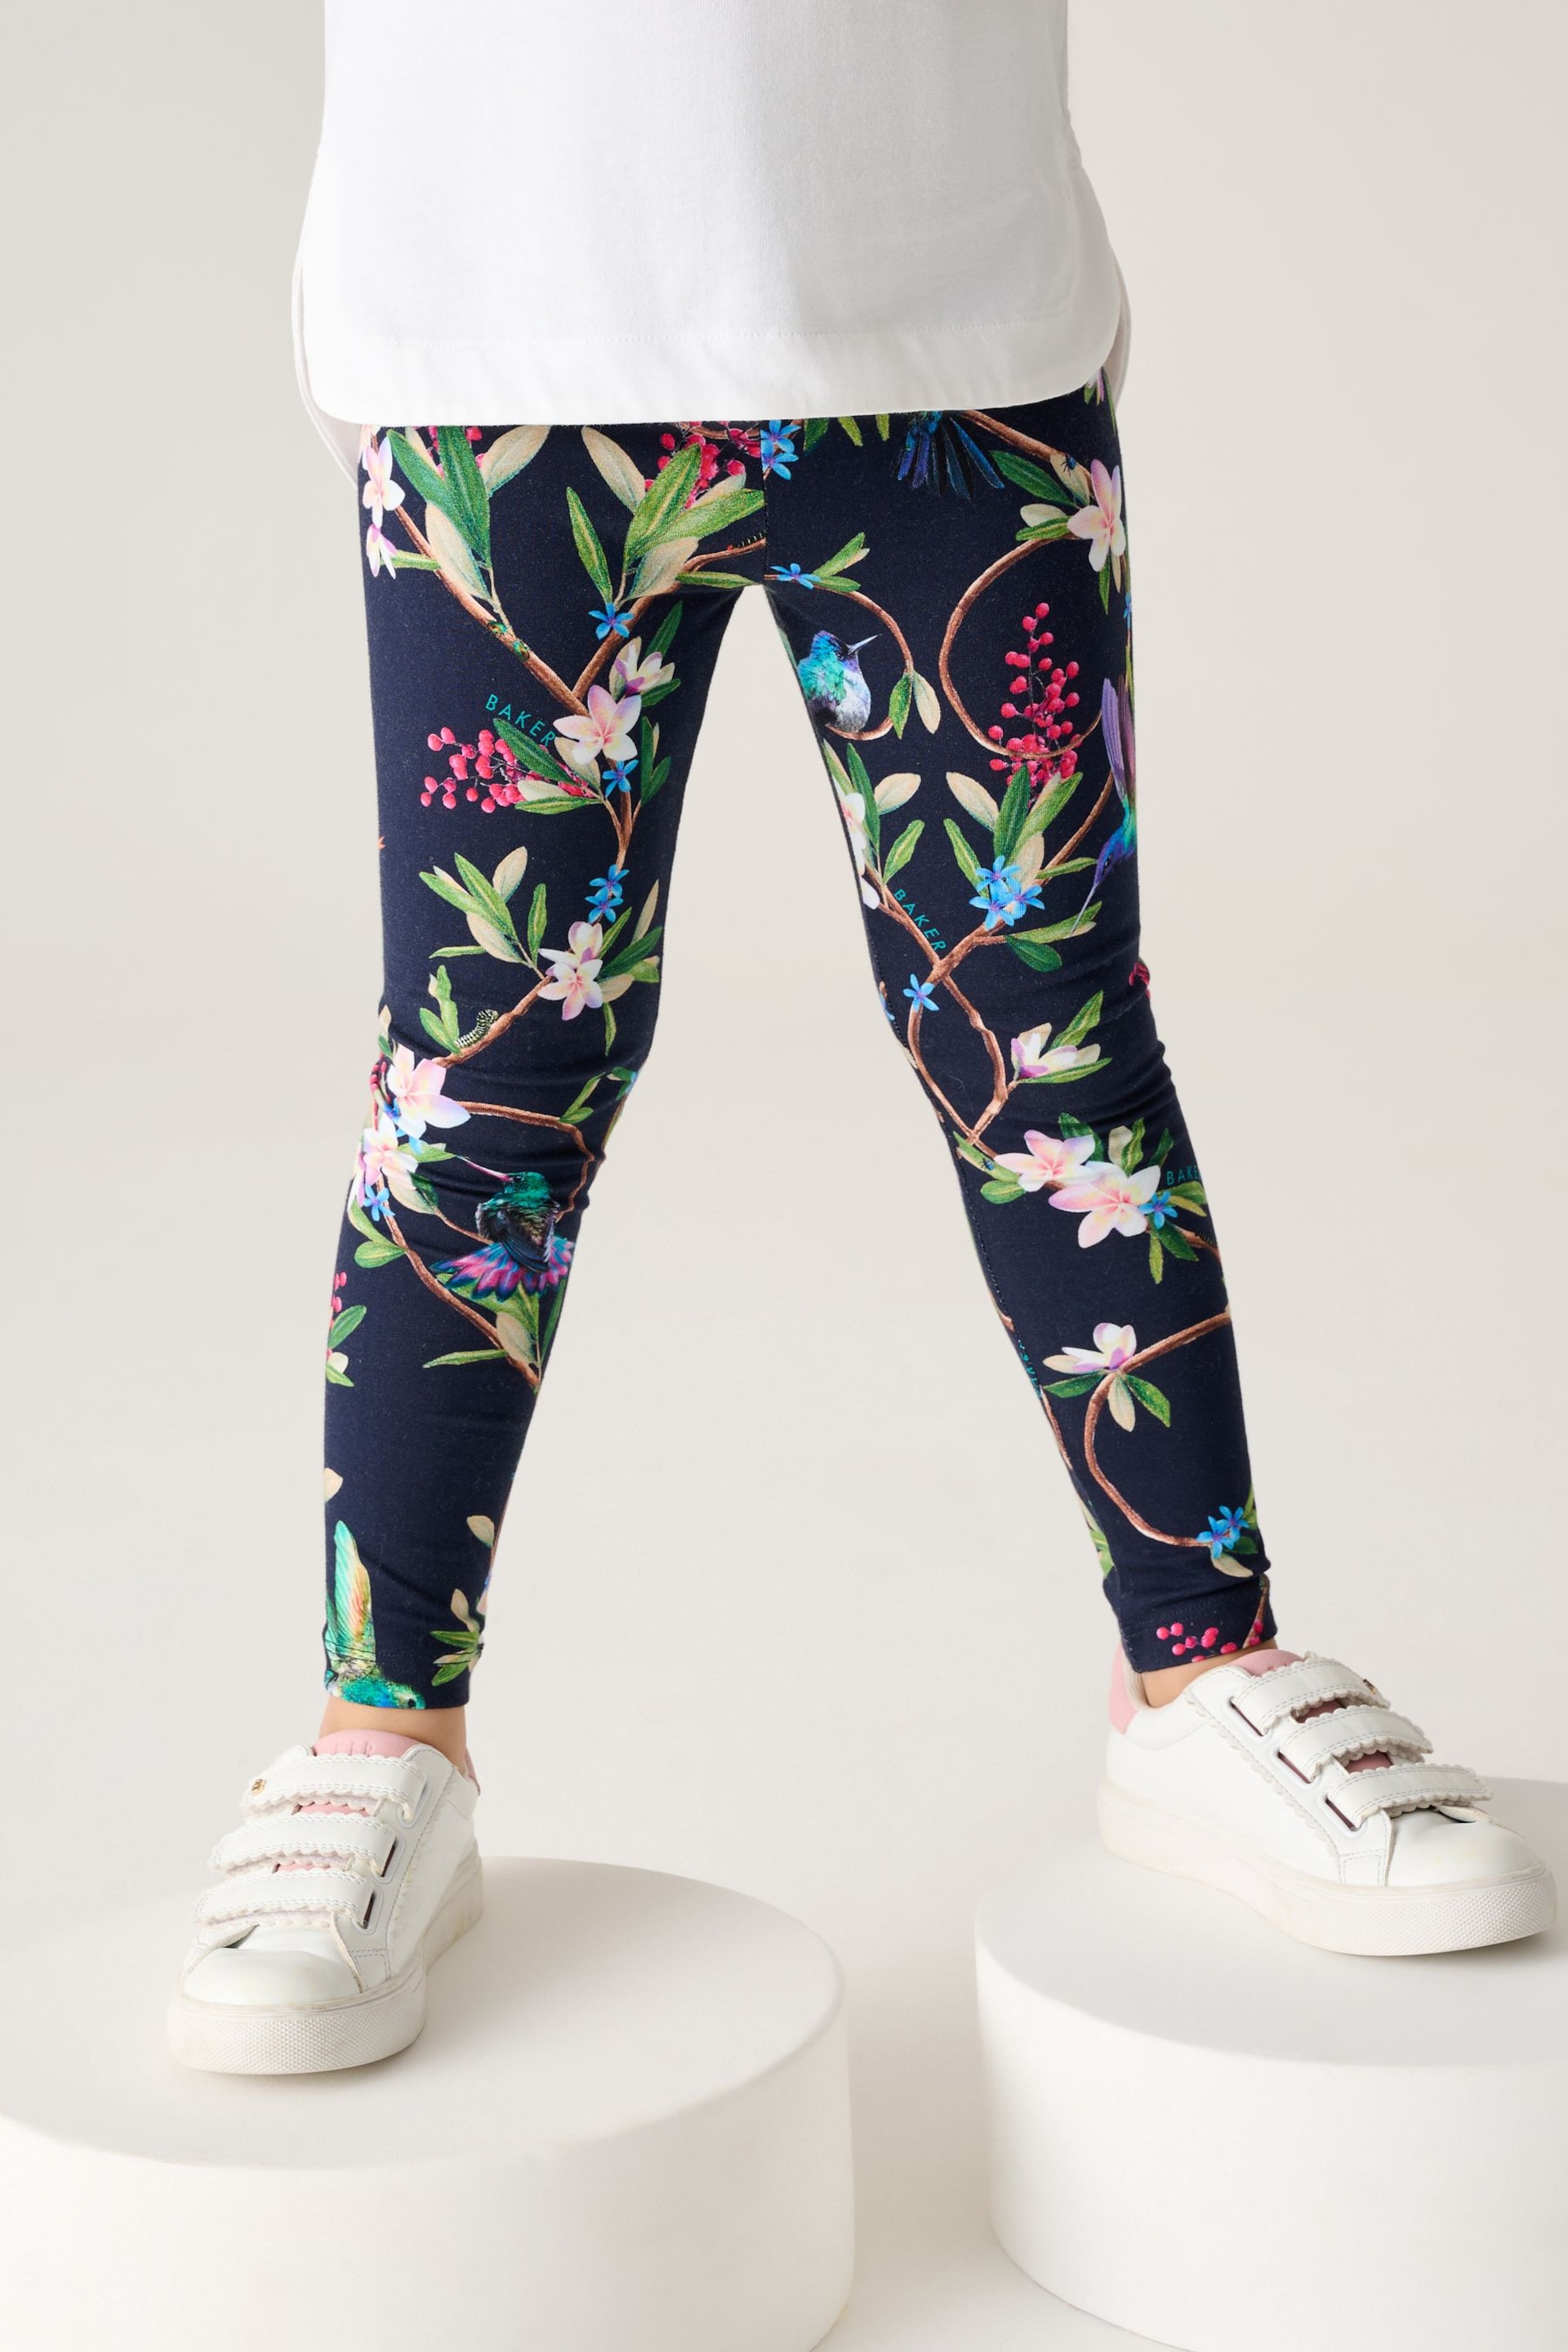 Baker by Ted Baker Navy Graphic T-Shirt and Legging Set - Image 5 of 11